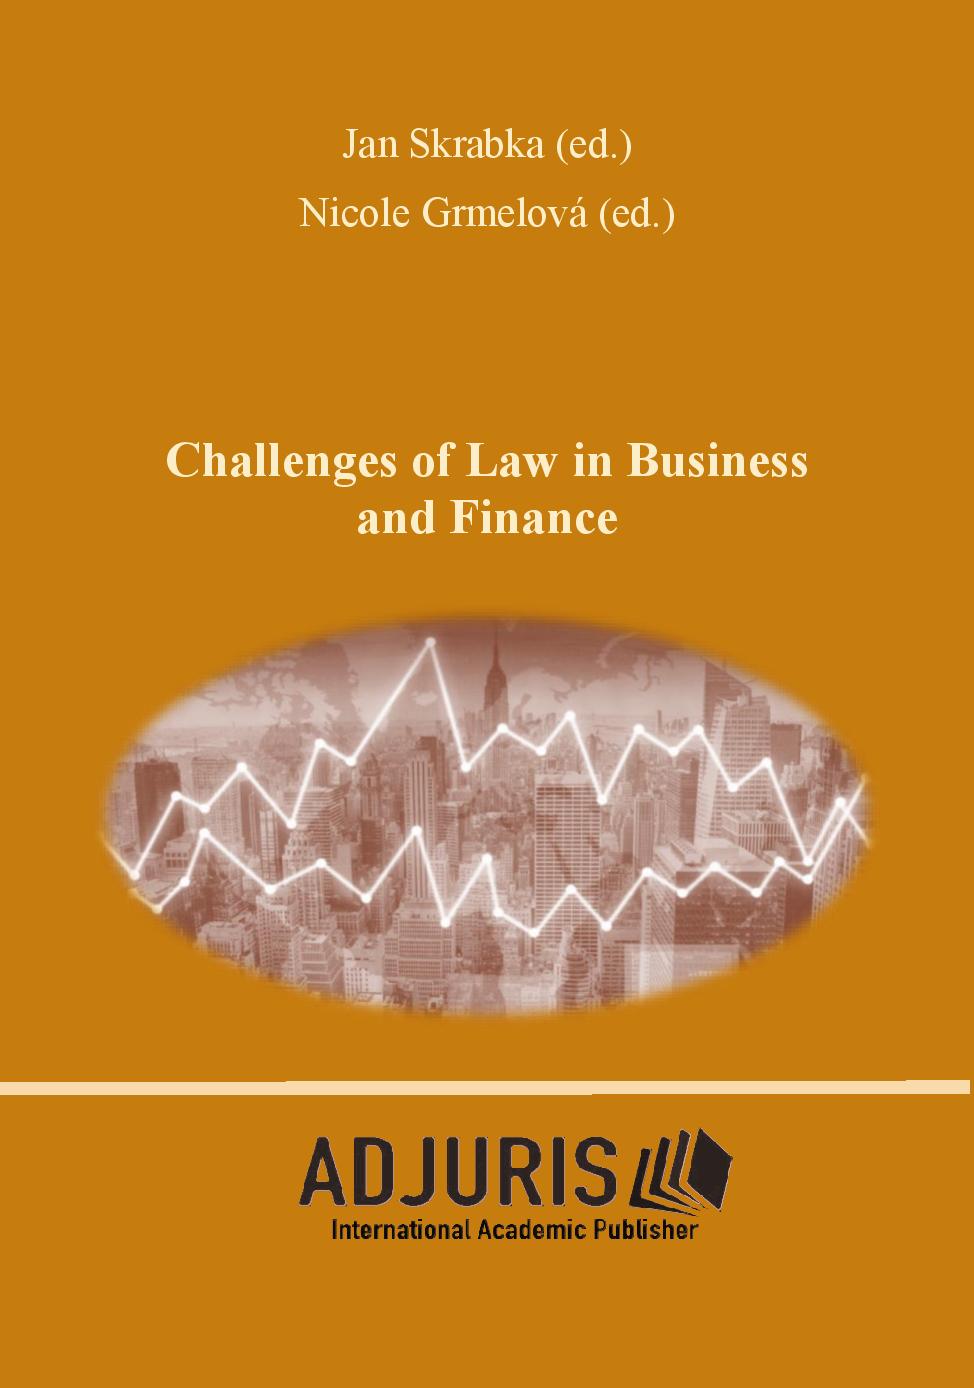 Challenges of Law in Business and Finance